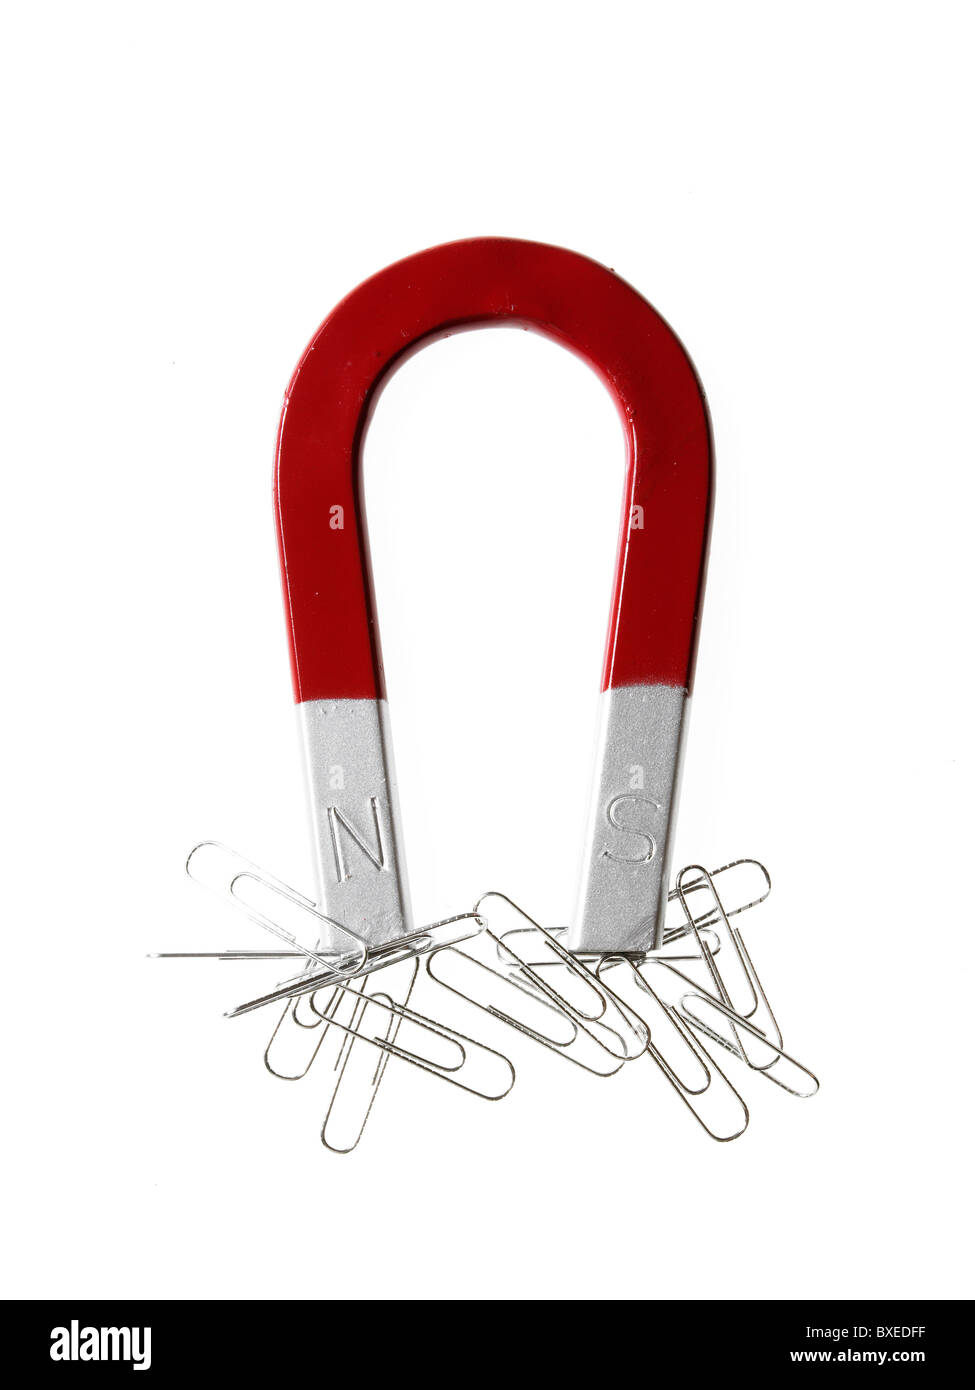 Magnet and paper clips Stock Photo